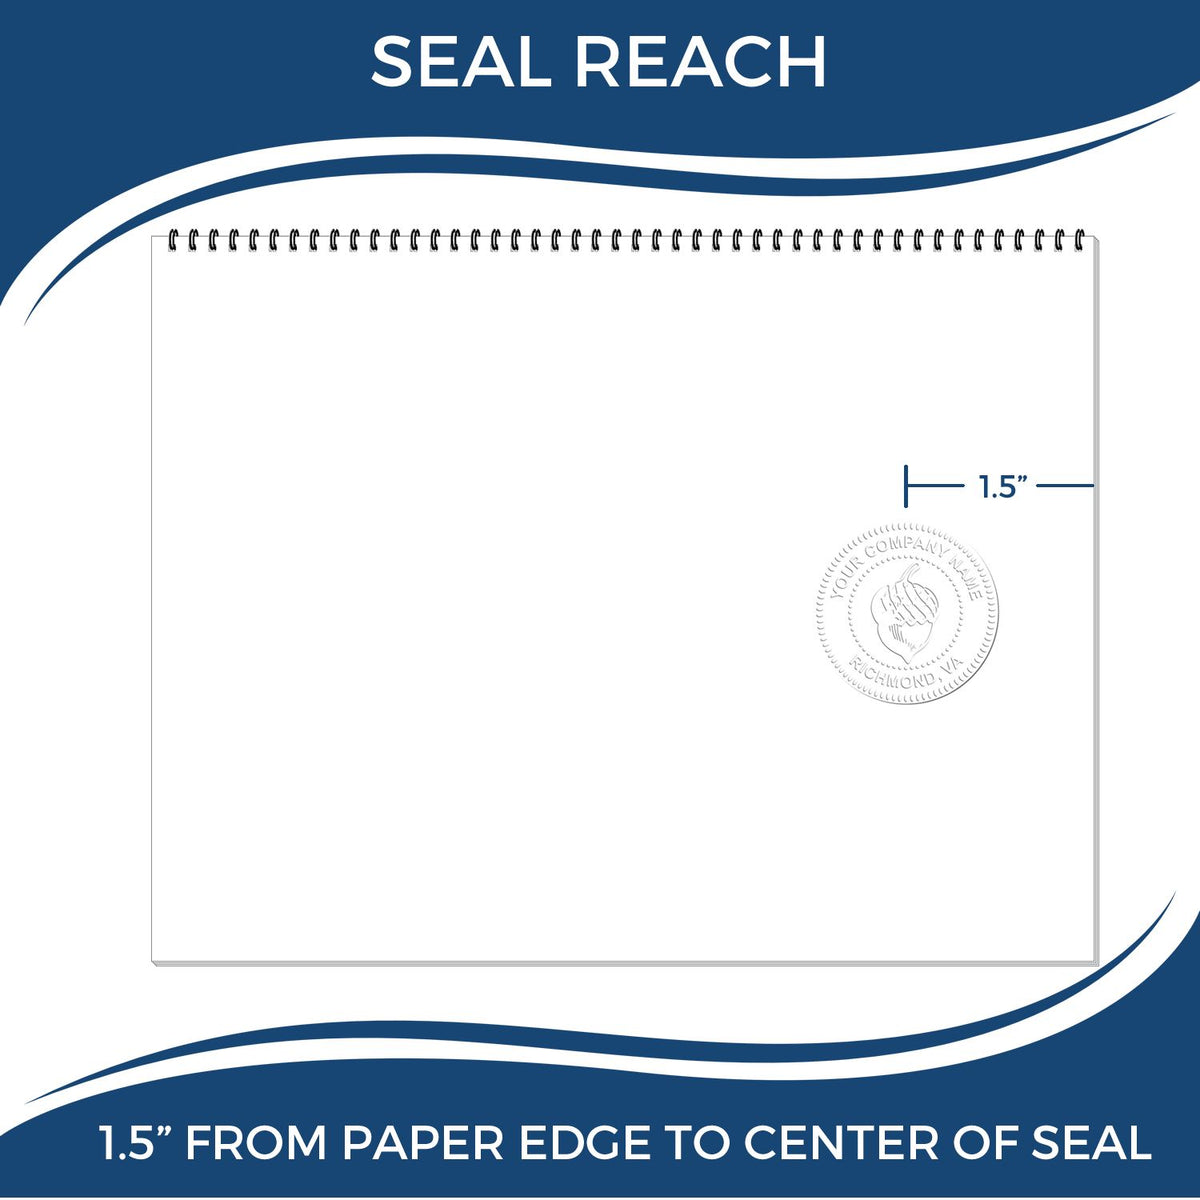 An infographic showing the seal reach which is represented by a ruler and a miniature seal image of the Hawaii Desk Surveyor Seal Embosser